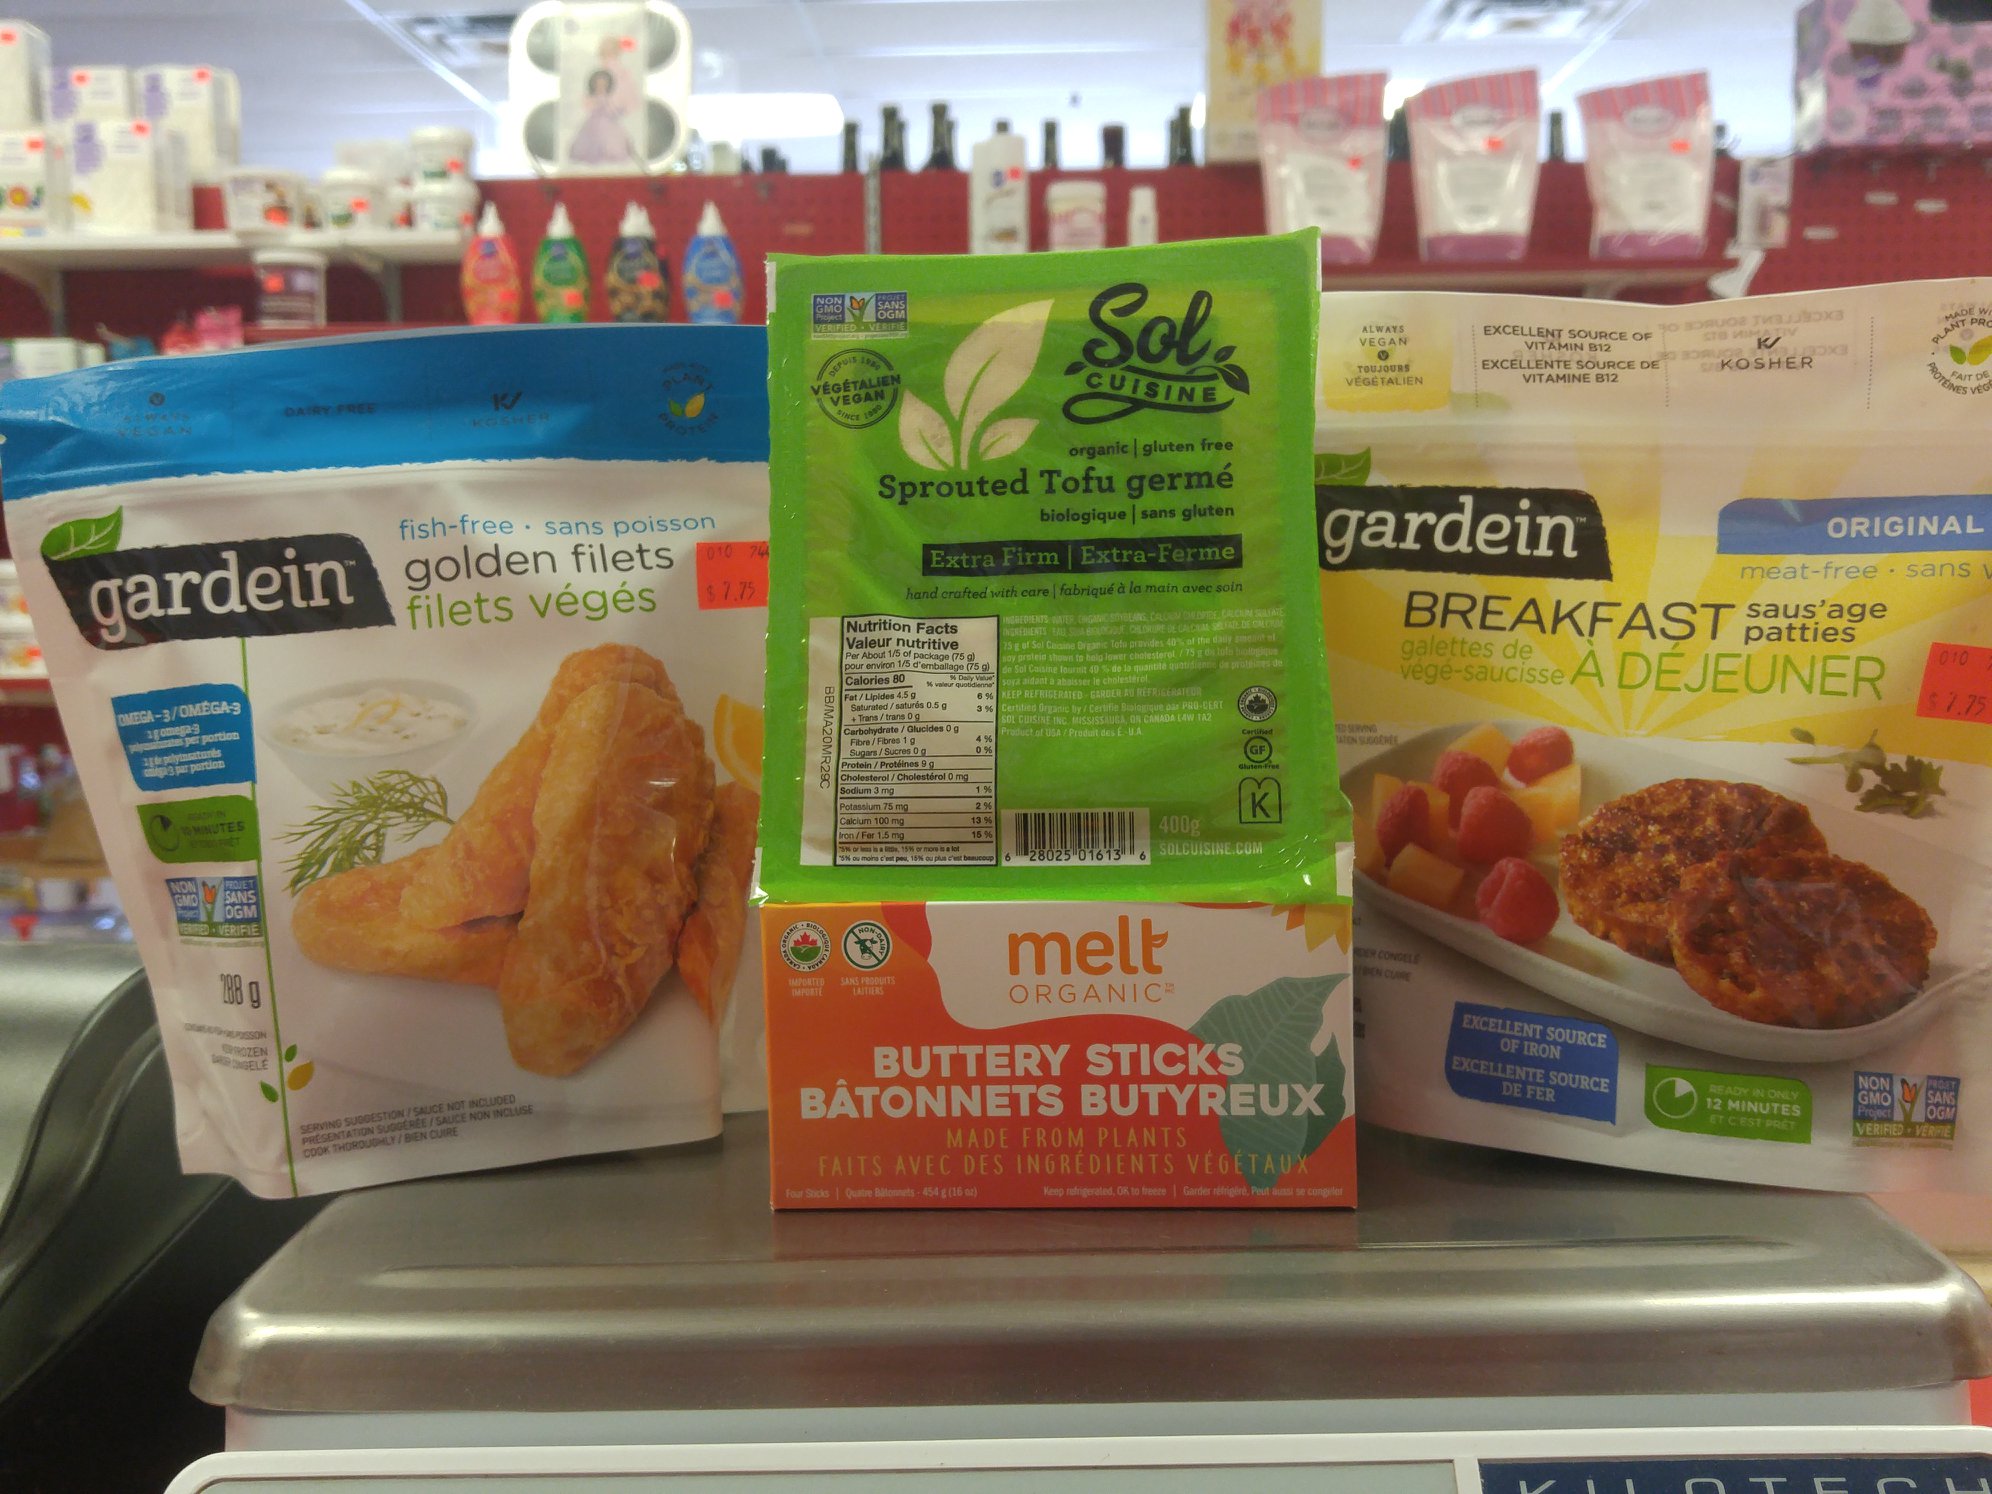 packages of vegan food products at Bins & Bins, with shelves full of groceries in the background.